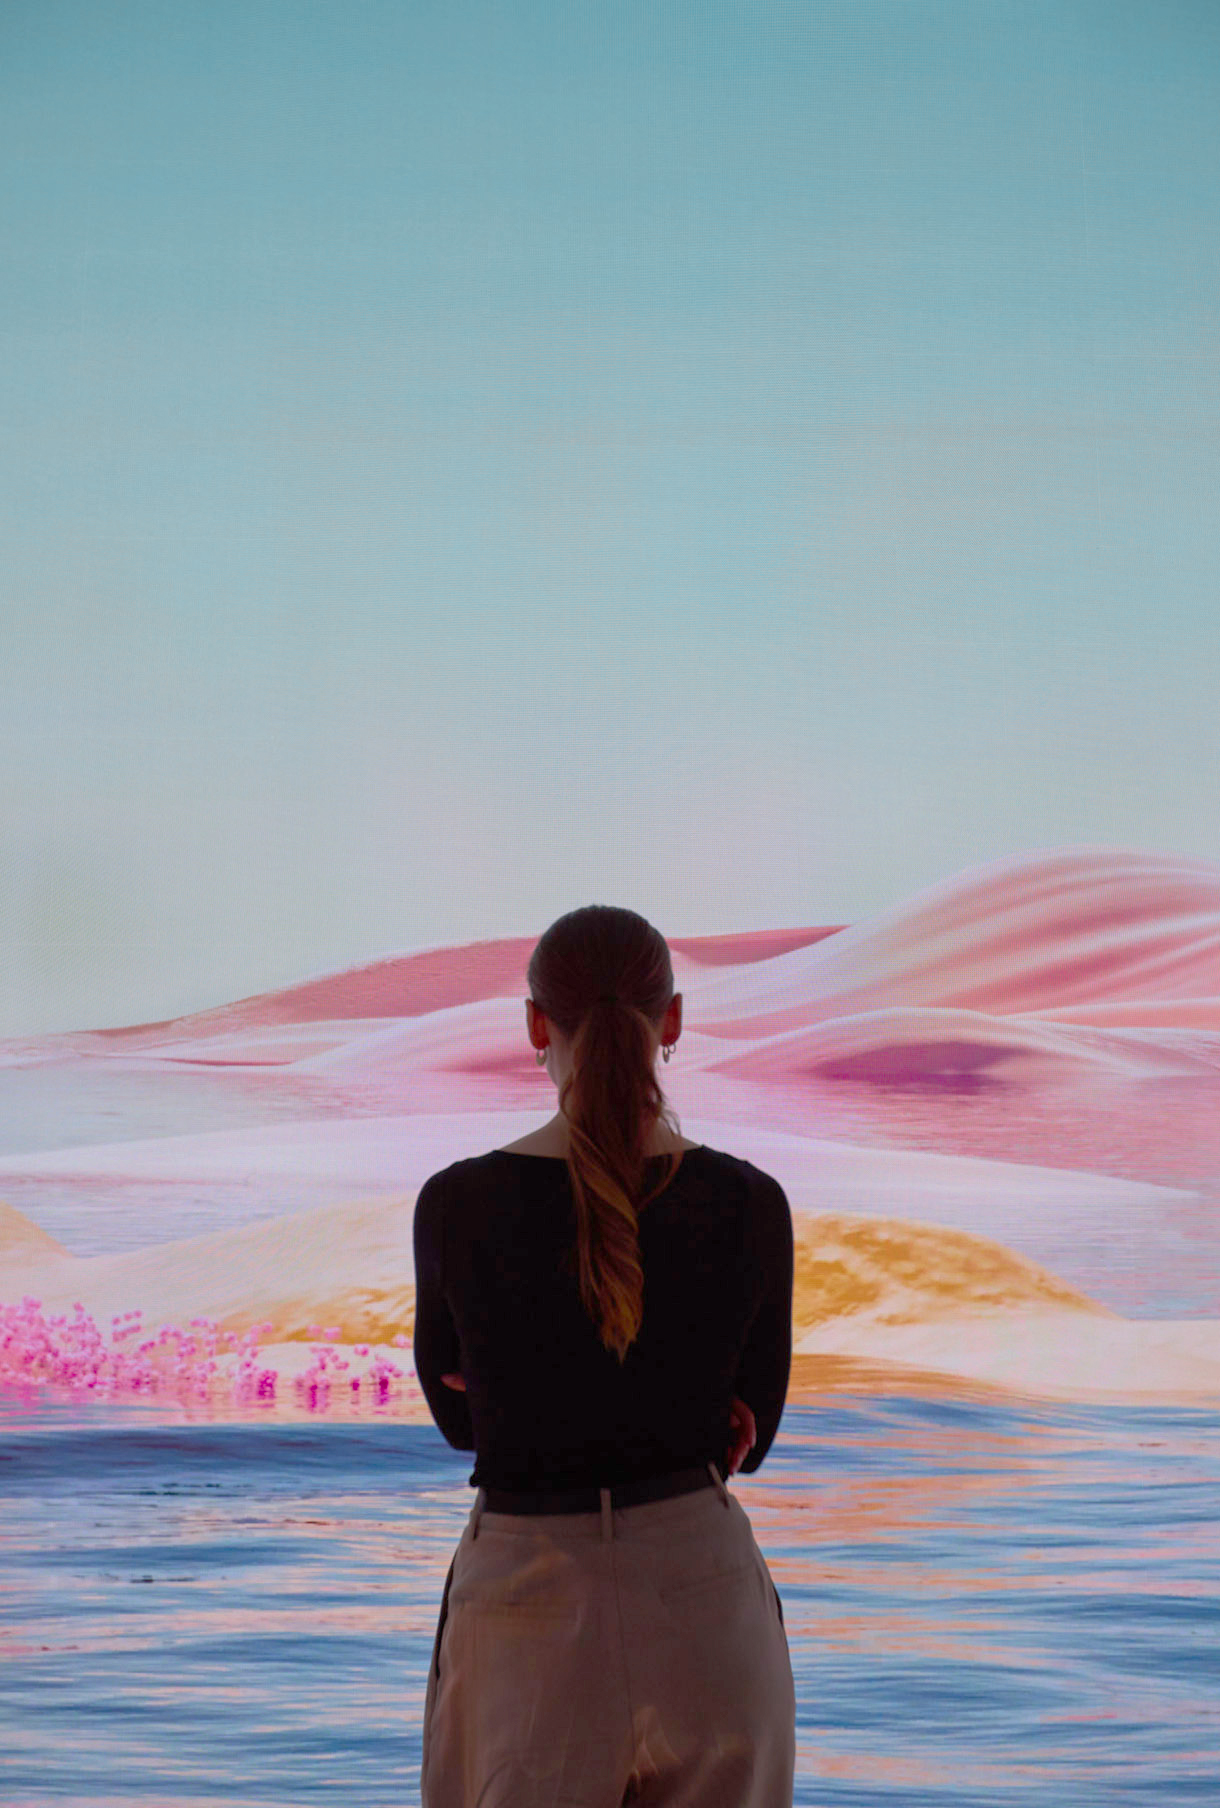 A woman with a ponytail stands with her back to the viewer, engrossed in a projected display of a vivid, dreamlike desert landscape